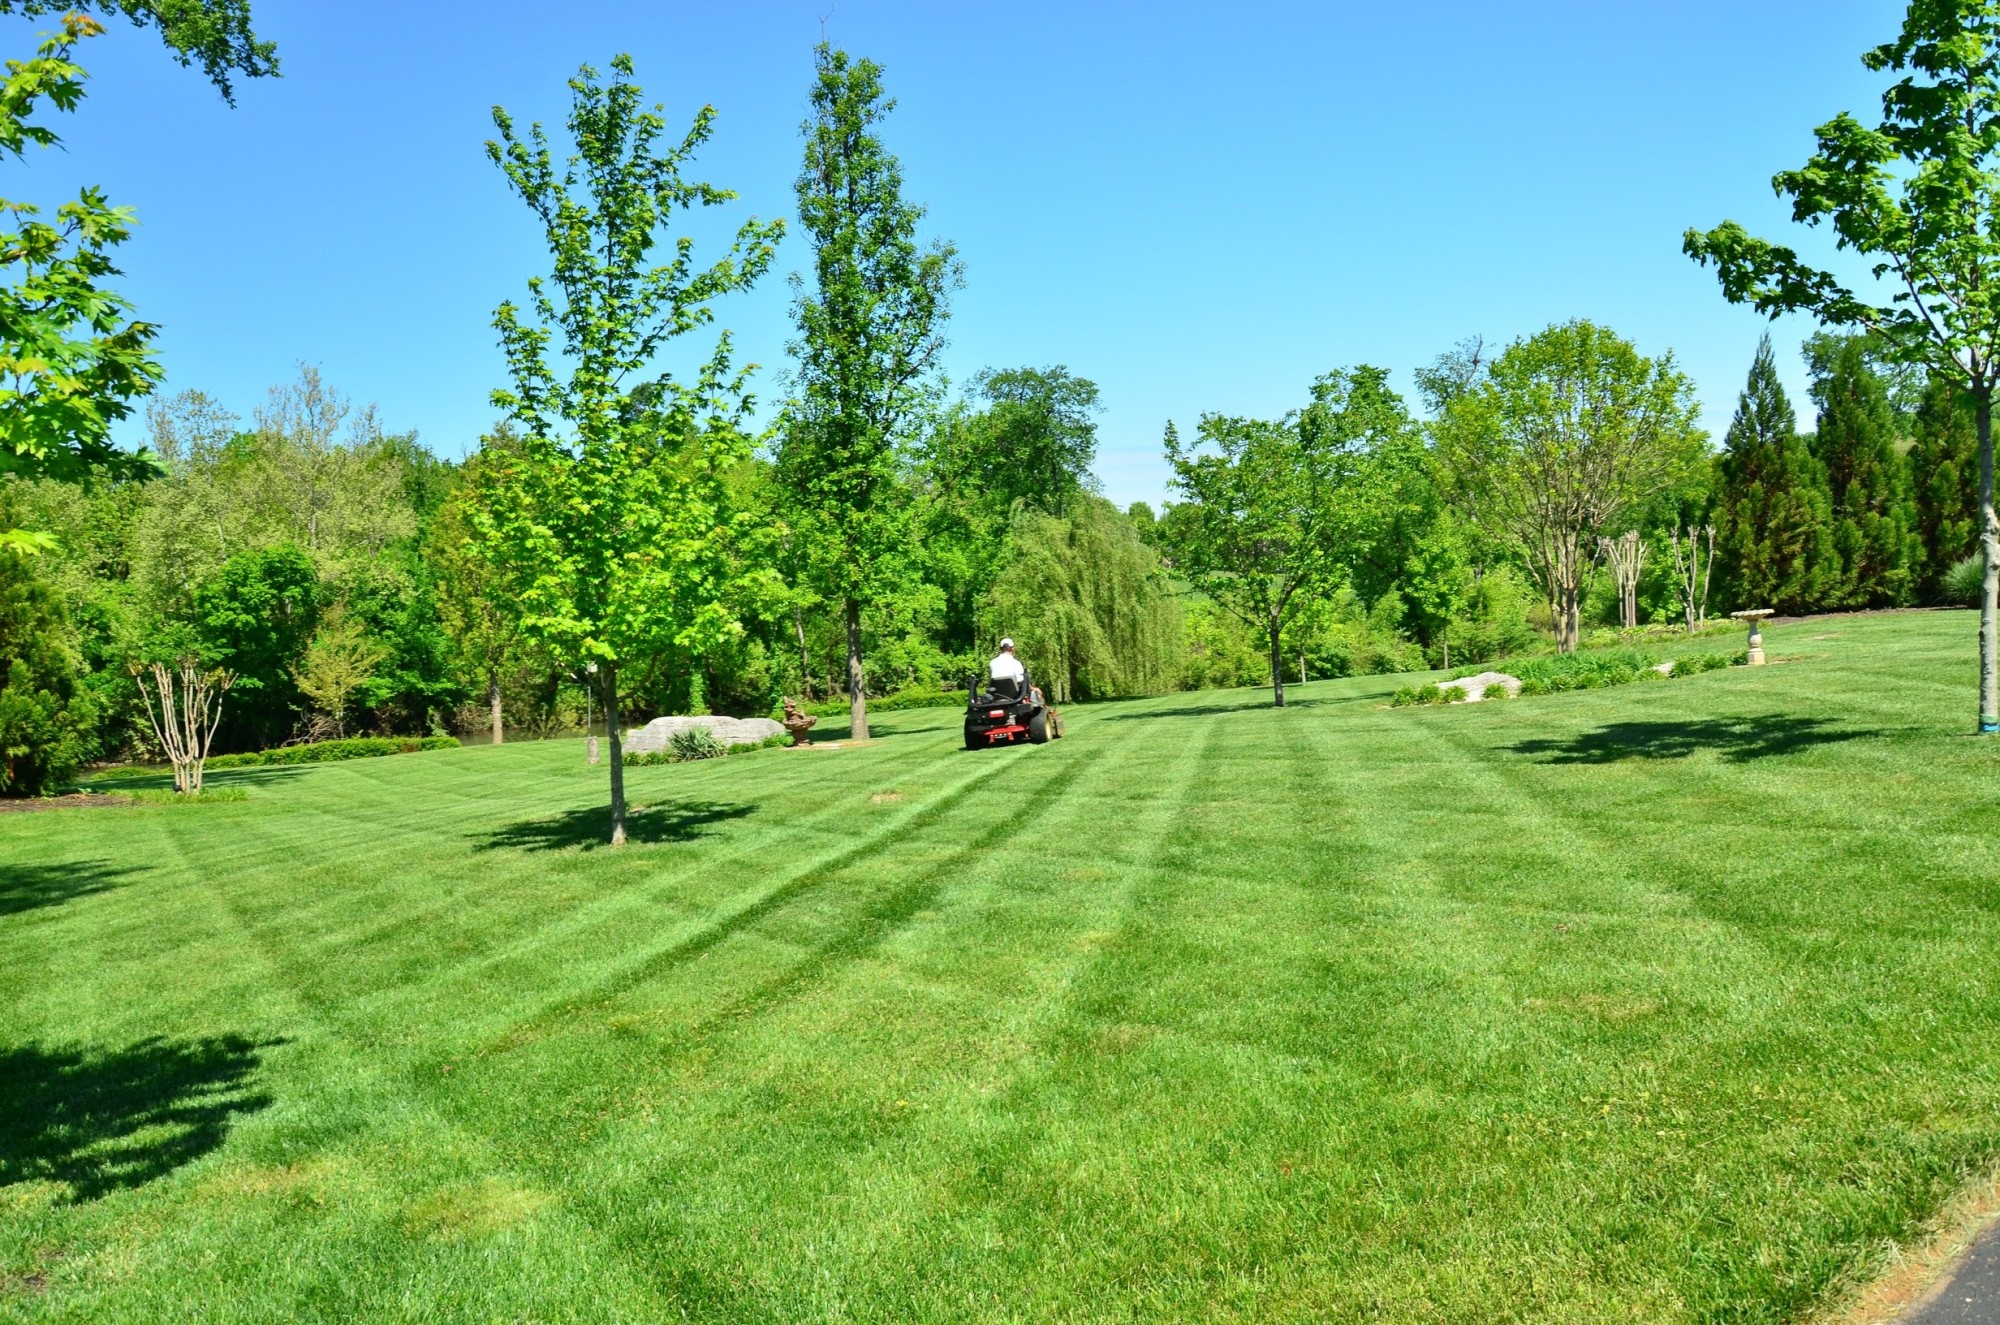 Lawn Care Services Prices